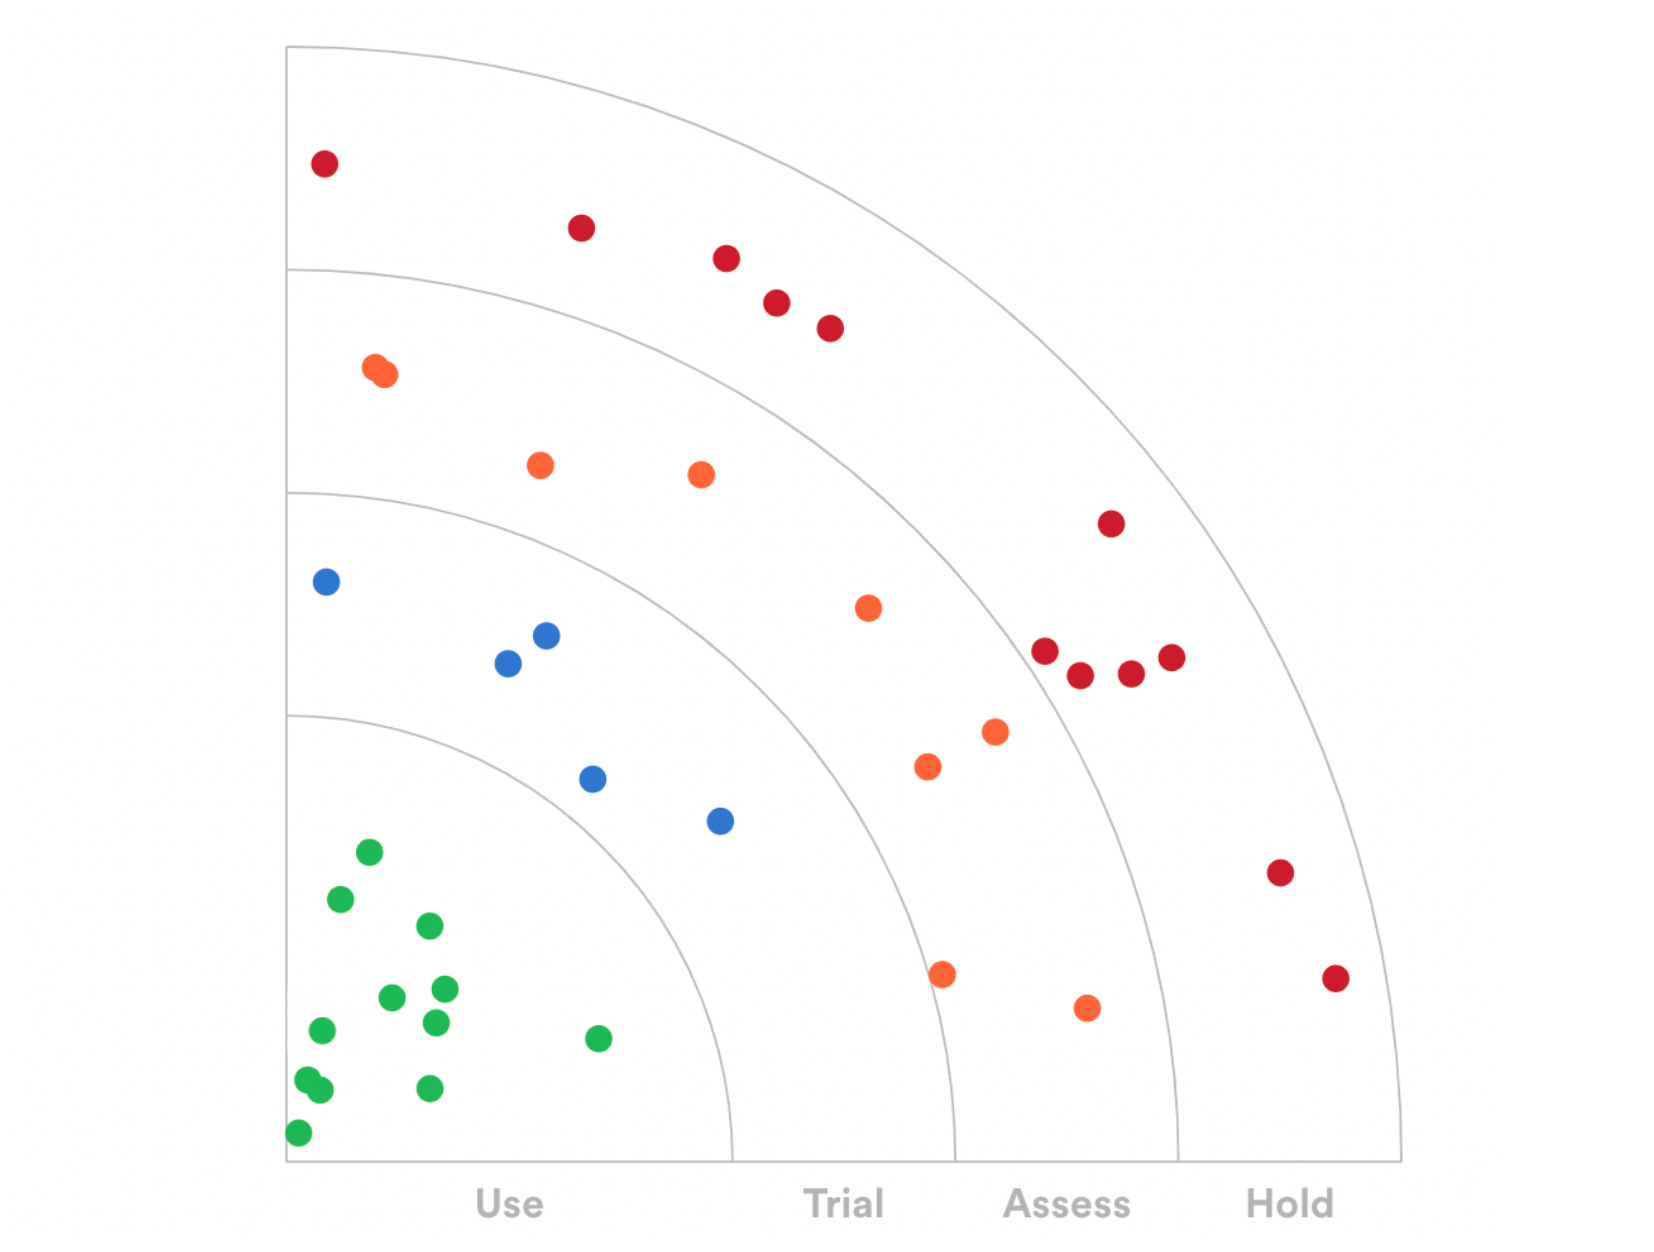 Quarter-circle visualization with the categories "Use", "Trial", "Assess", and "Hold" from center to edge, along with colored dots in each area. 